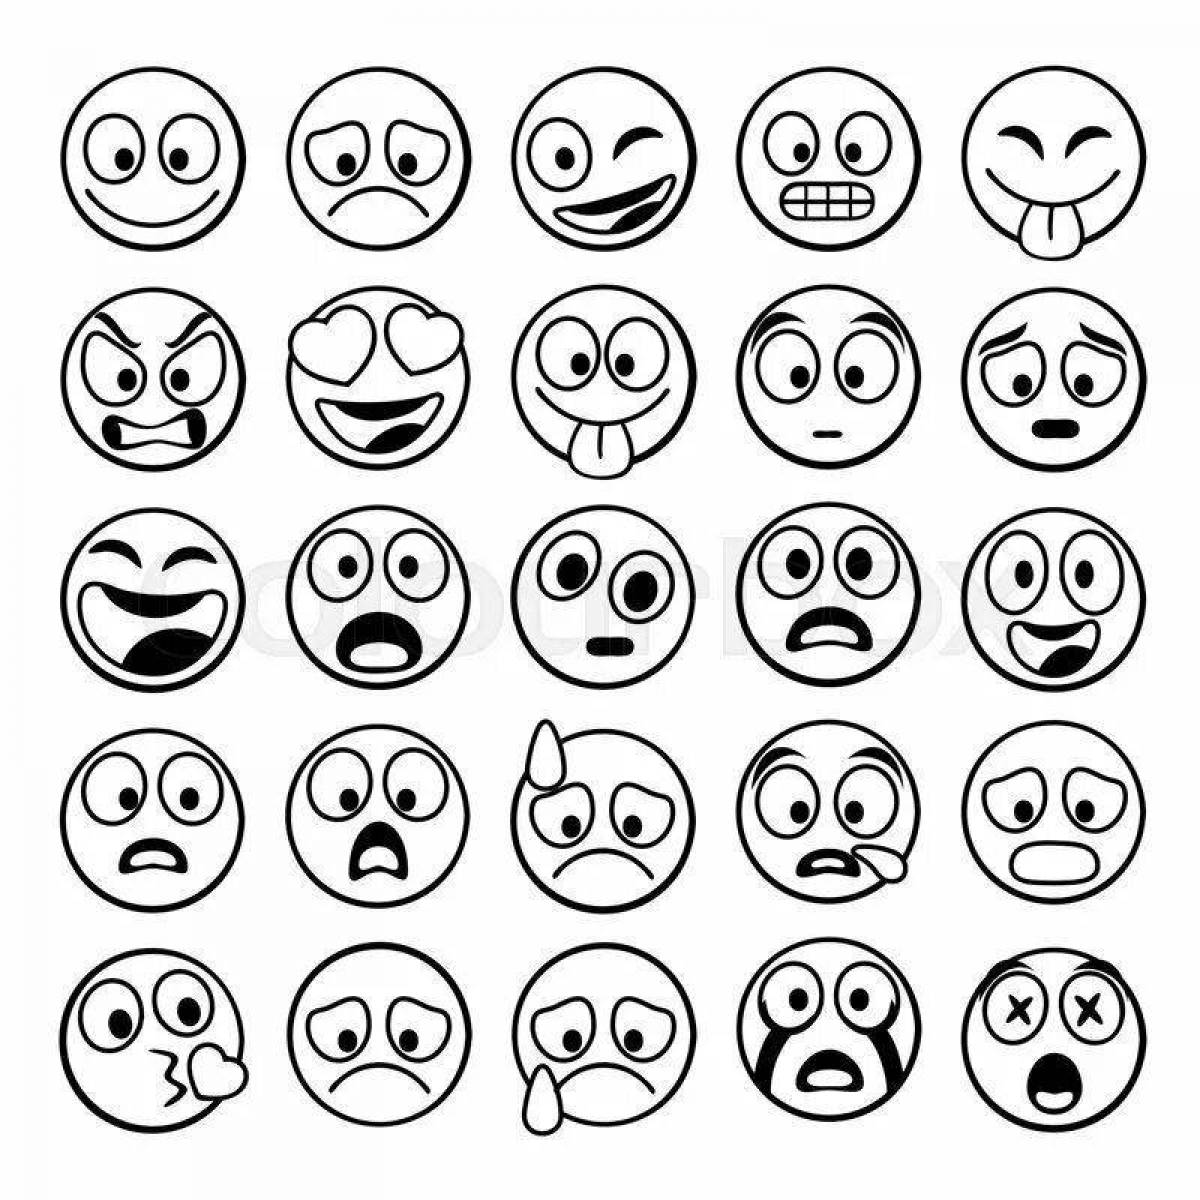 Amazing emoji coloring pages, small